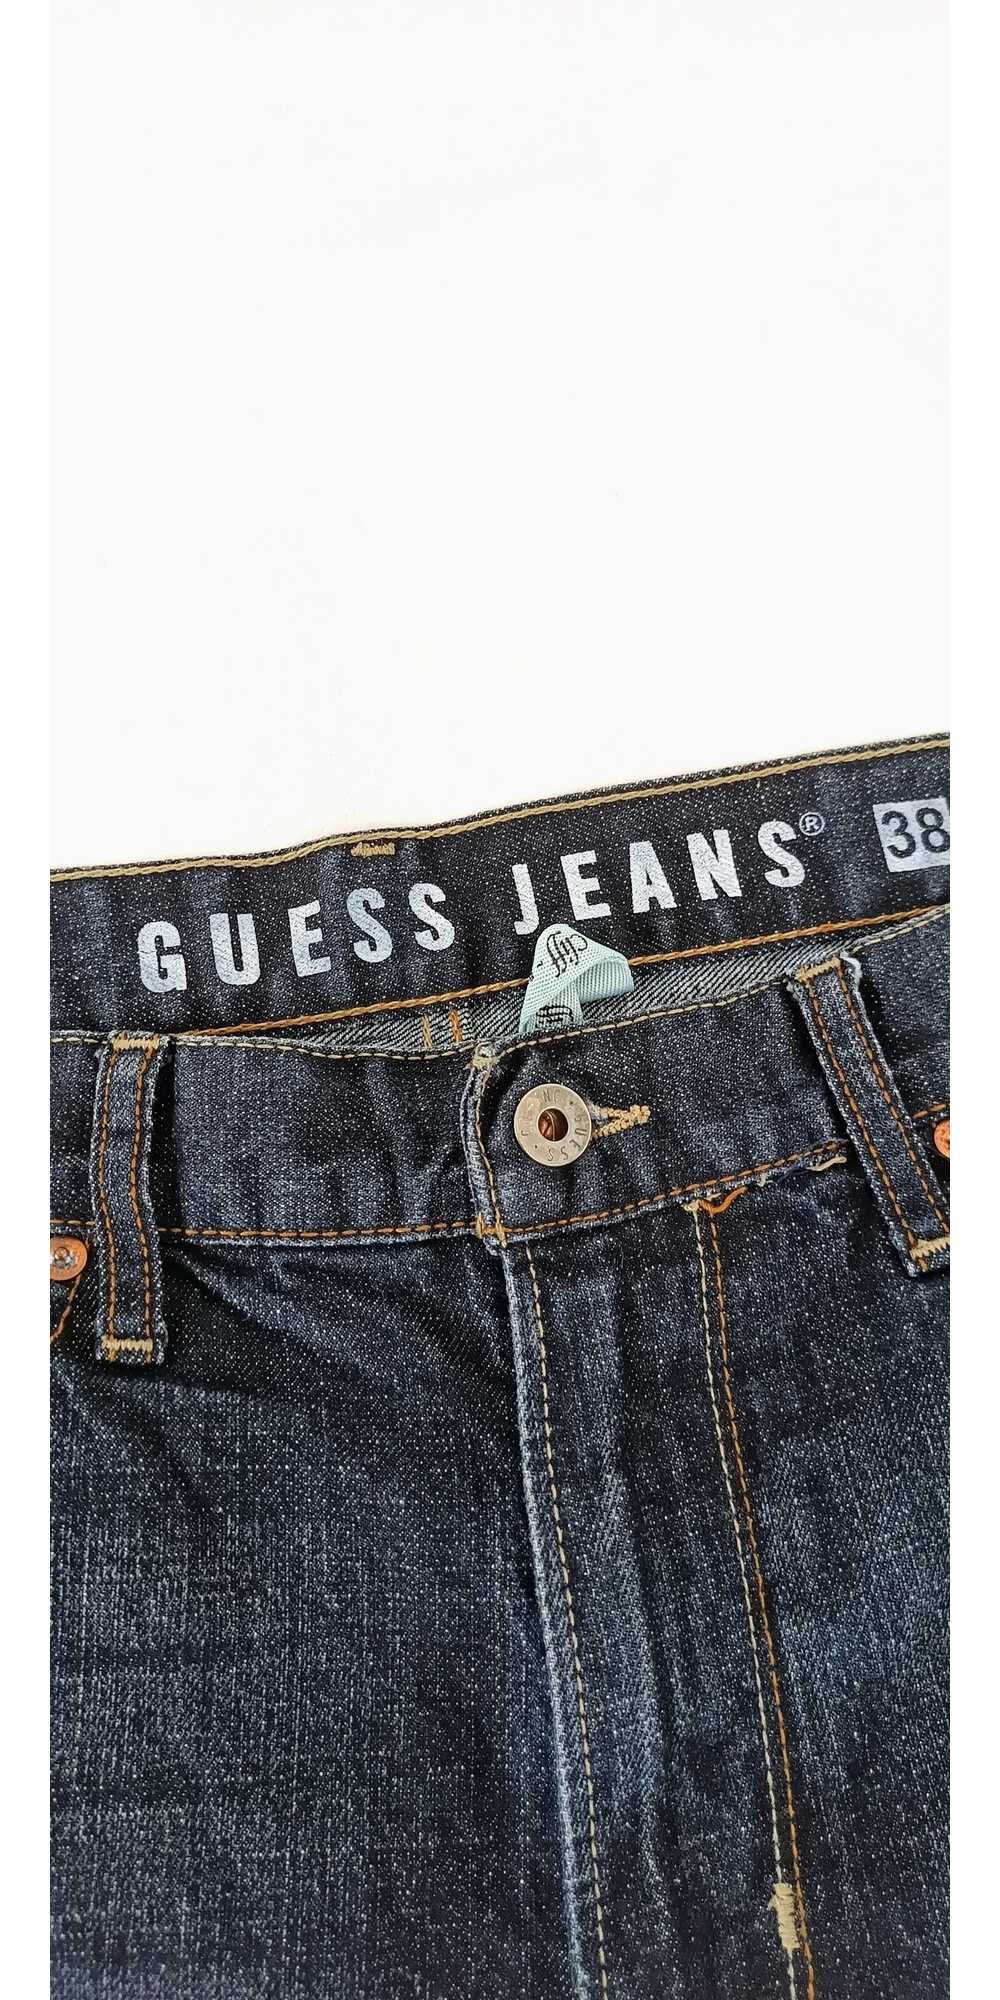 Guess × Japanese Brand × Streetwear GUESS Jeans C… - image 3